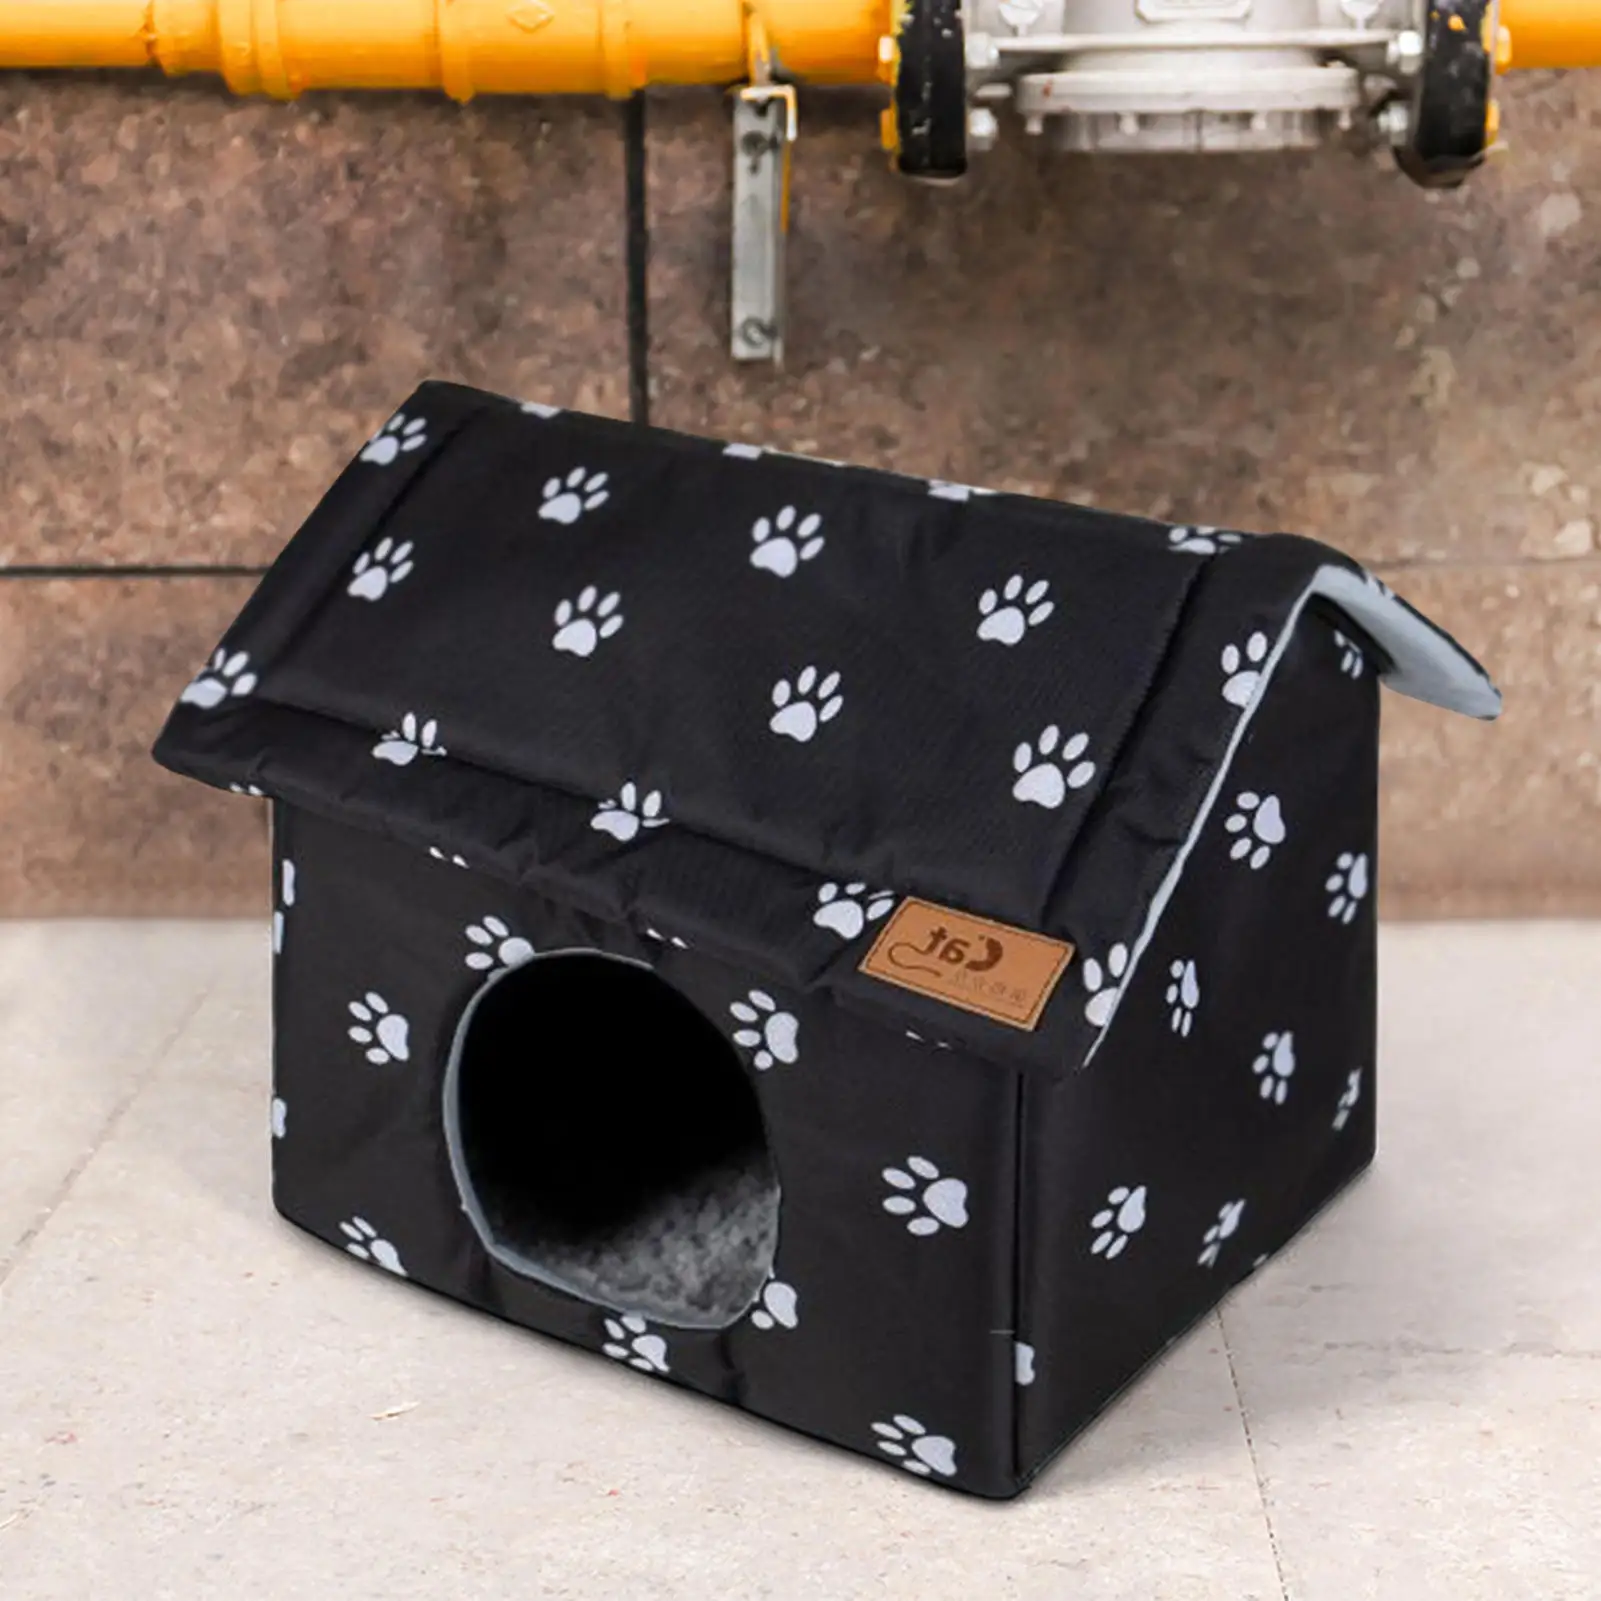 

Outdoor Cat House 2 Sizes Waterproof Insulated Indoor Kitty Shelter Safe Washable Protection Comfort Warmest Care Tool-free Semi